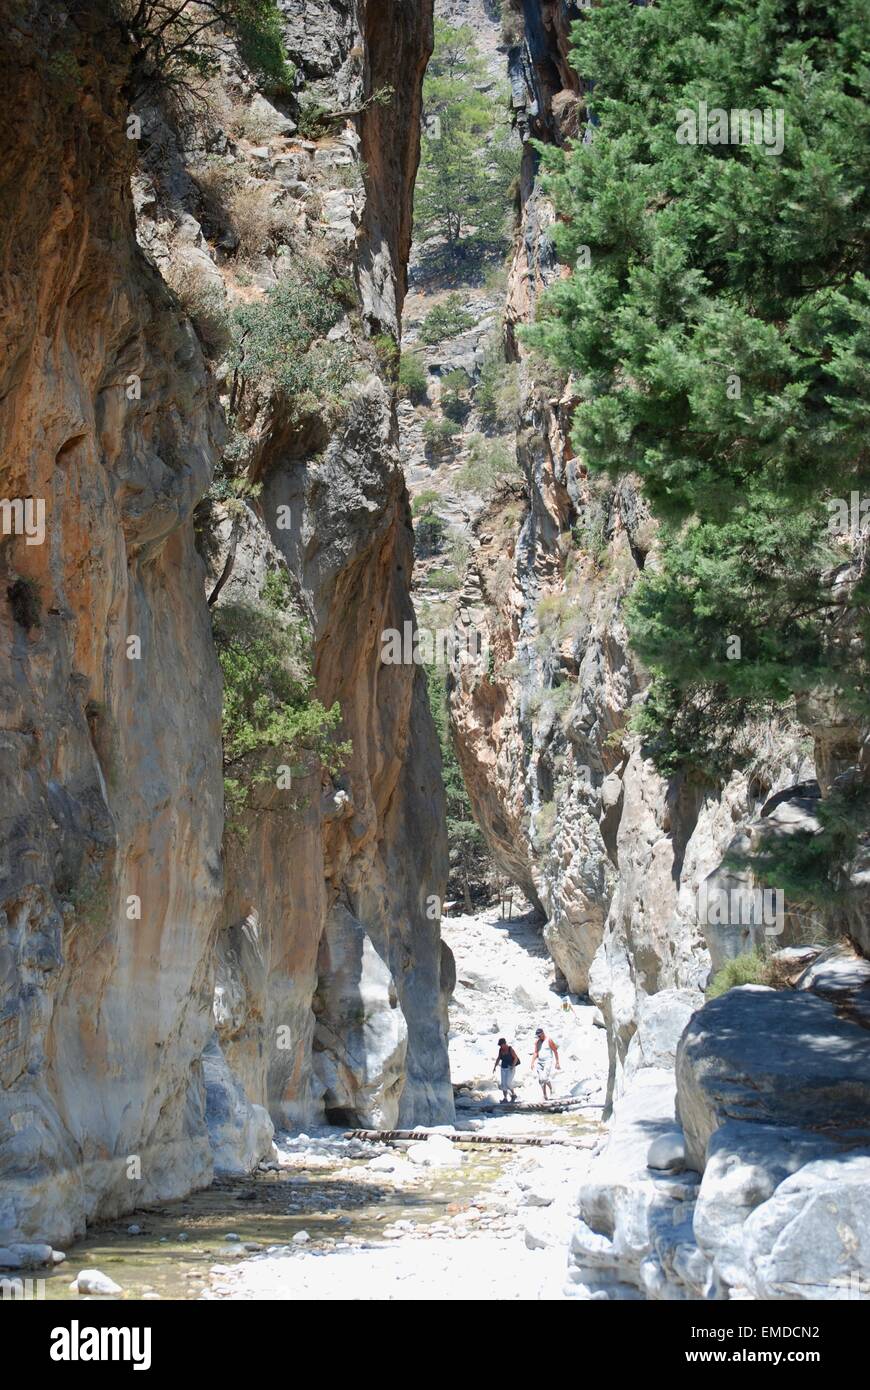 People walking along a hot dry riverbed at a narrow pass between steep sides of the Samaria Gorge, South West Crete, Greece. Stock Photo